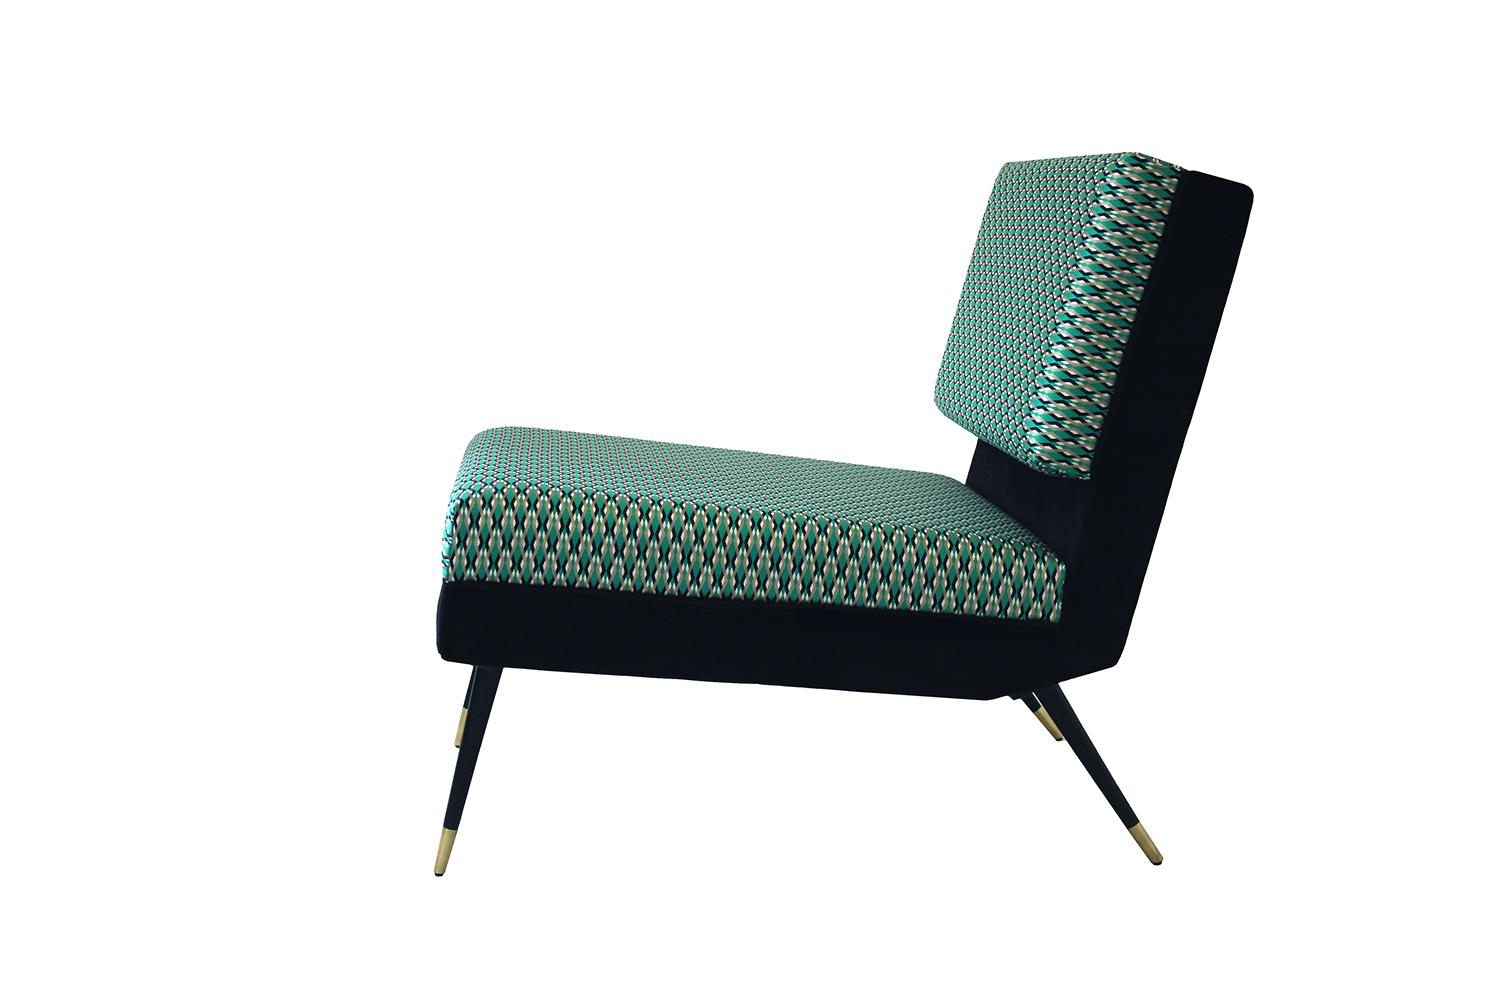 Cocò, Geometric-Shaped Armchair with Vintage Look - Green In New Condition For Sale In Tradate, IT